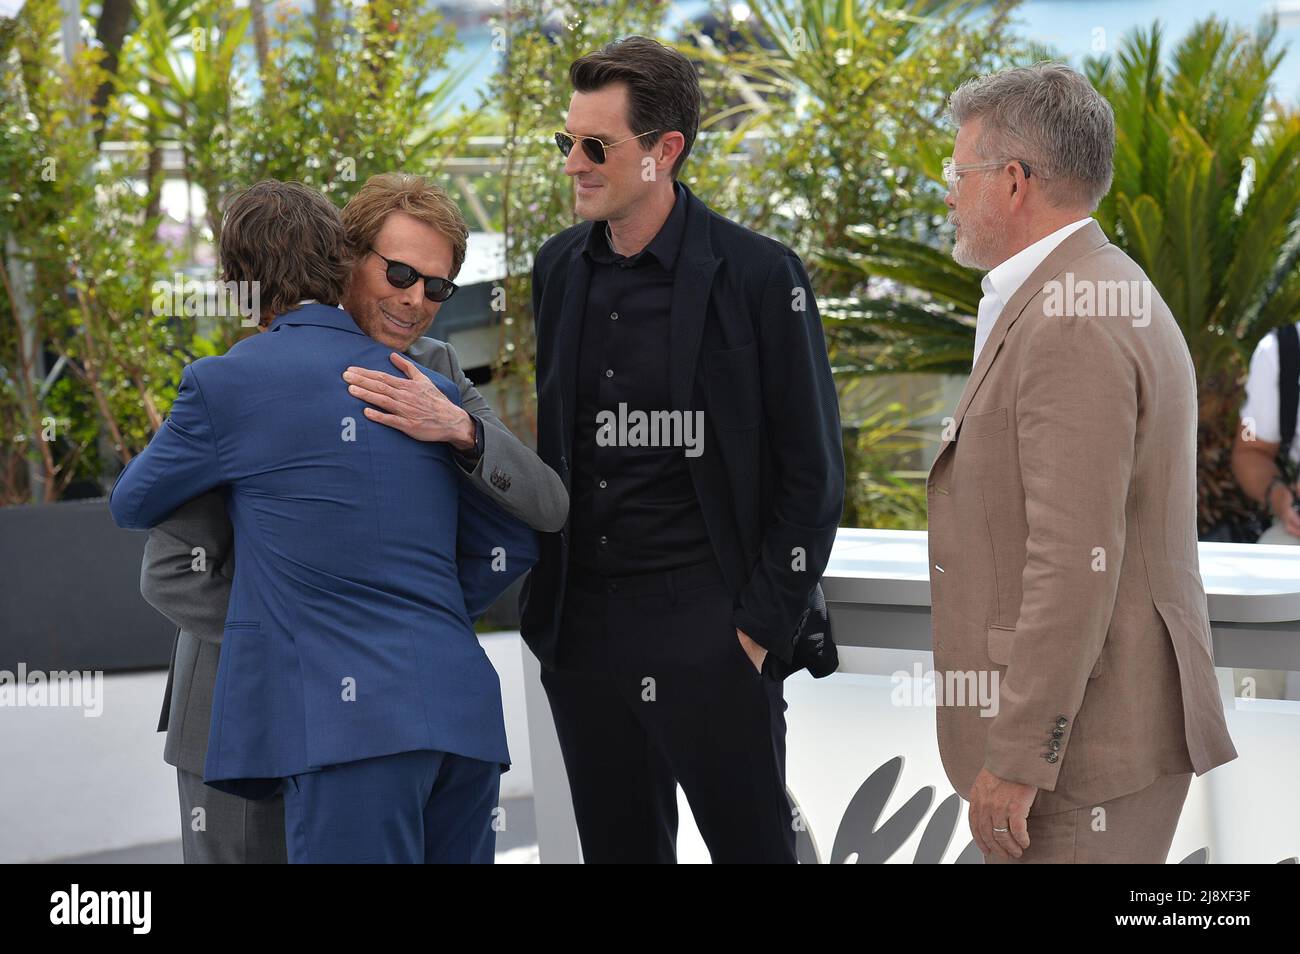 Cannes, France. 18th May, 2022. Jerry Bruckheimer (l-r), Tom Cruise, Joseph Kosinski and Christopher McQuarrie attend the photocall of 'Top Gun: Maverick' during the 75th Annual Cannes Film Festival at Palais des Festivals. Credit: Stefanie Rex/dpa/Alamy Live News Stock Photo